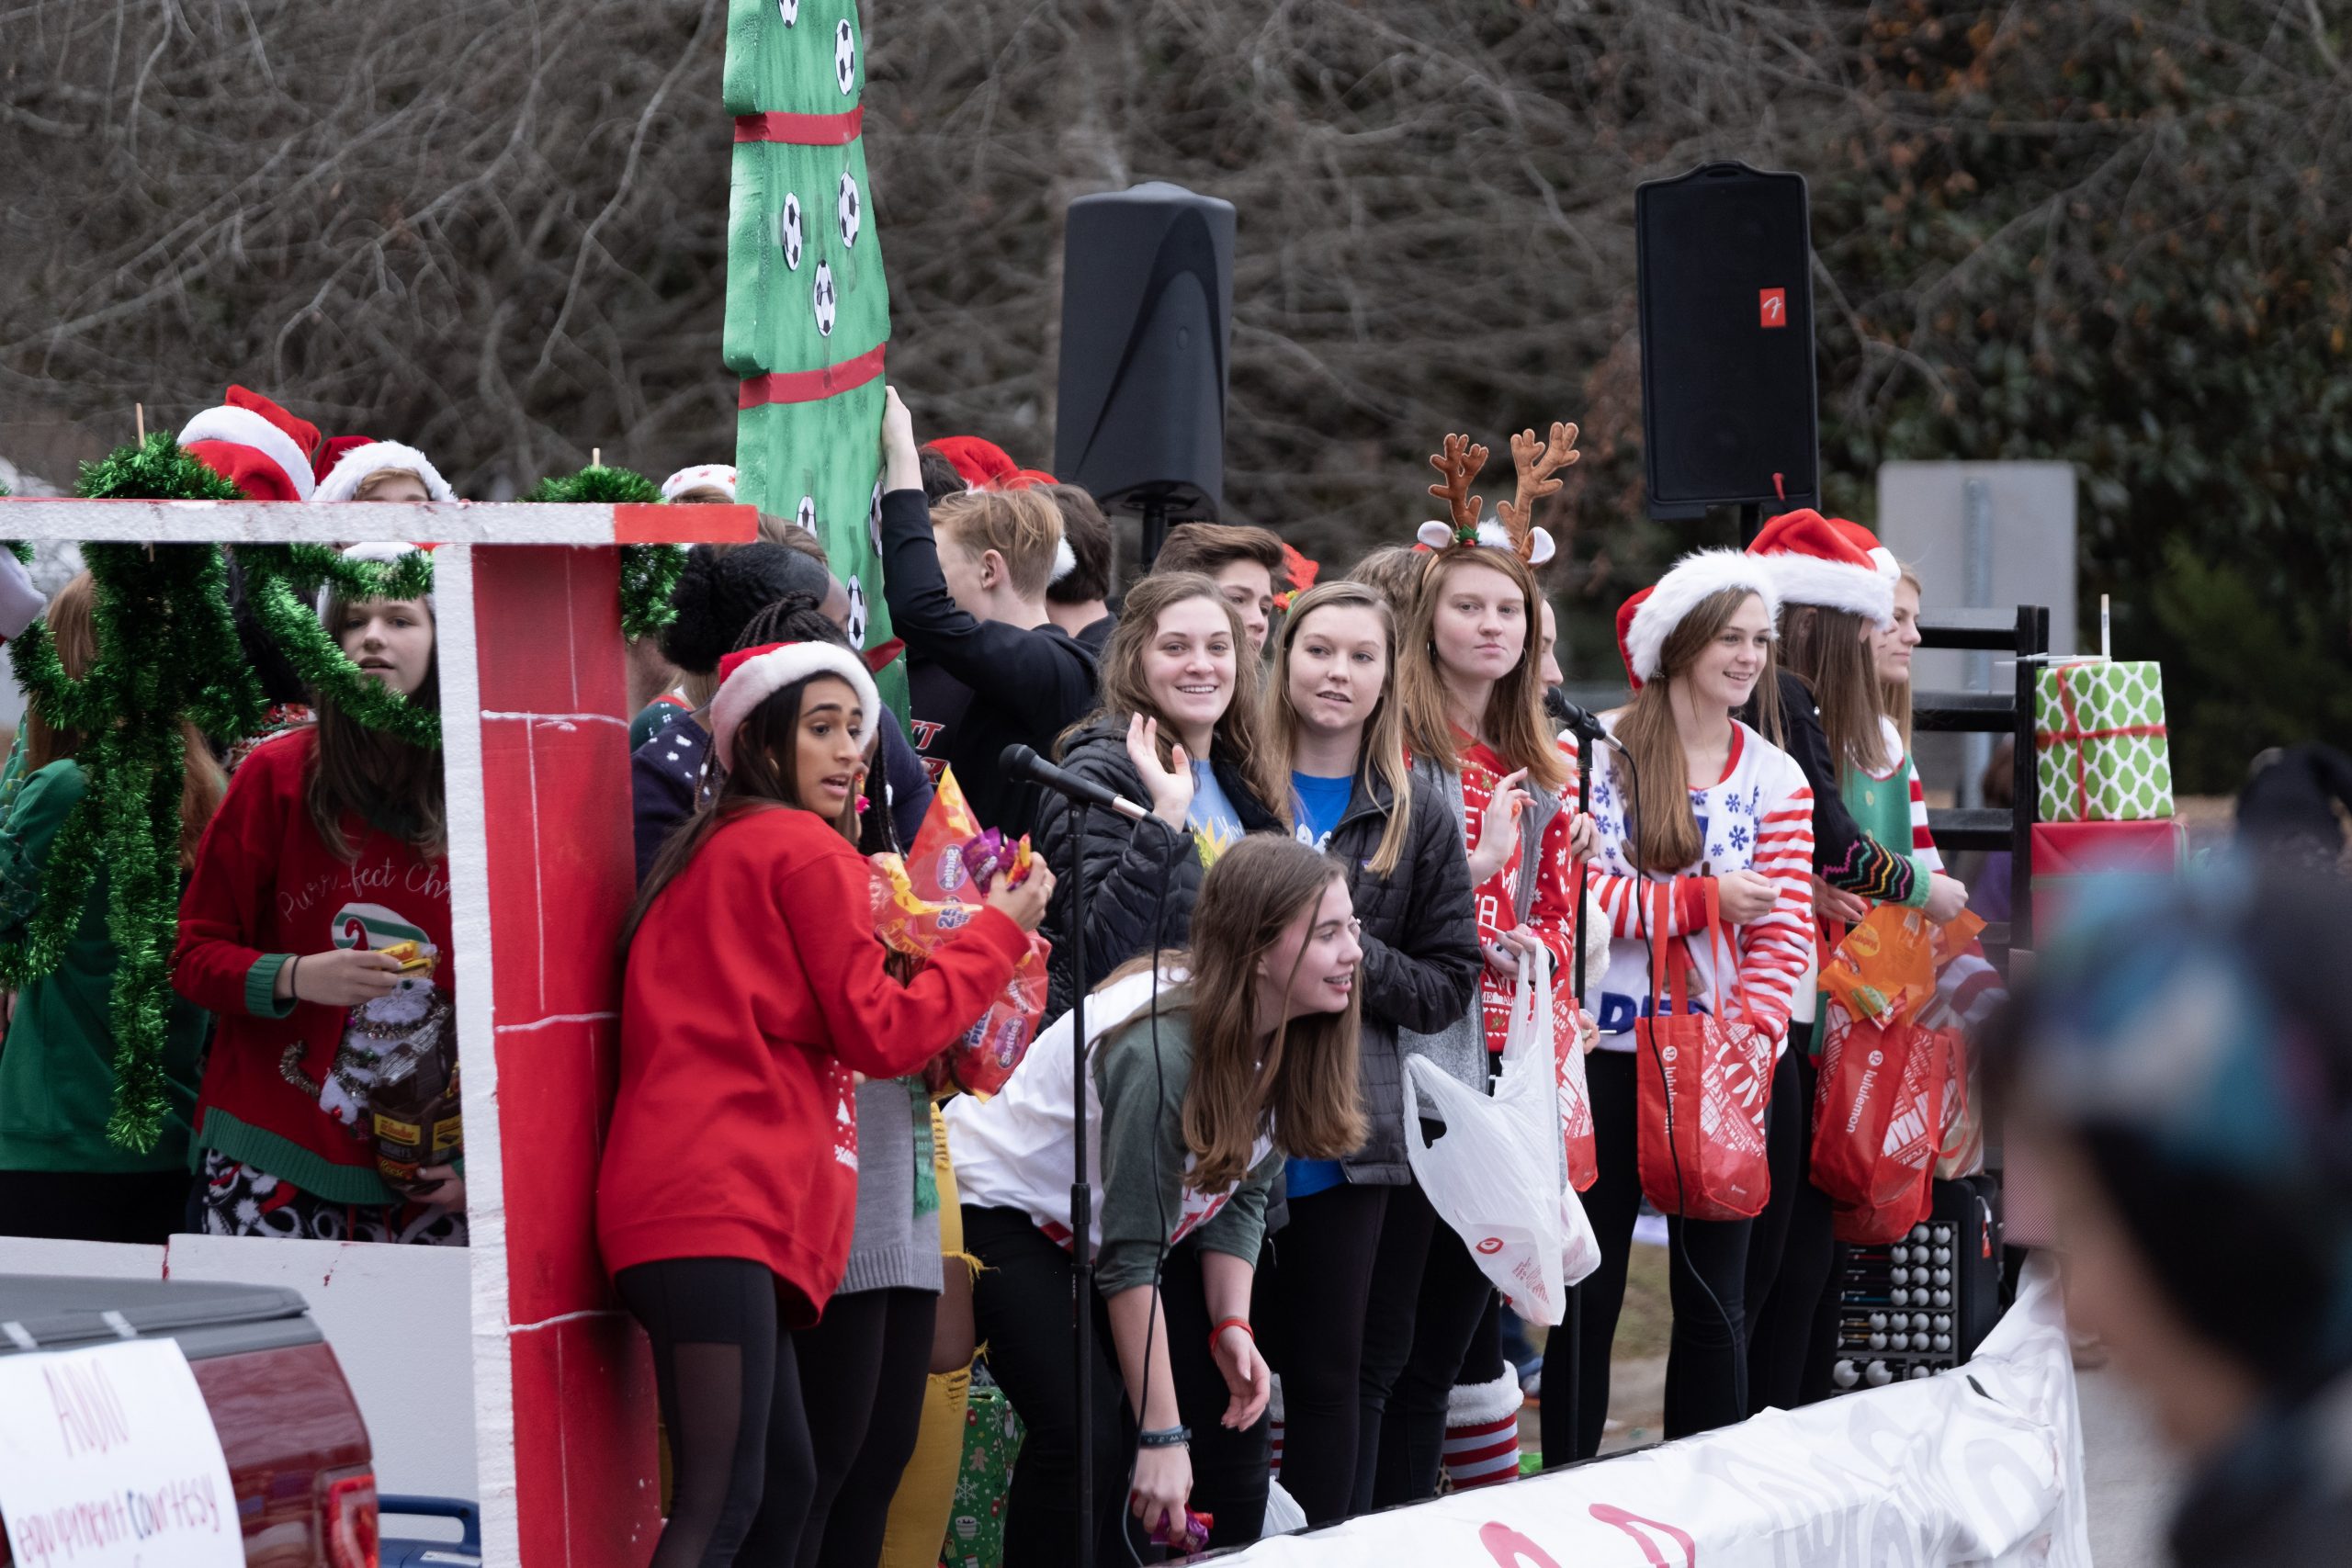 Grayson Pope announced as Grand Marshal for the Trussville Christmas Parade